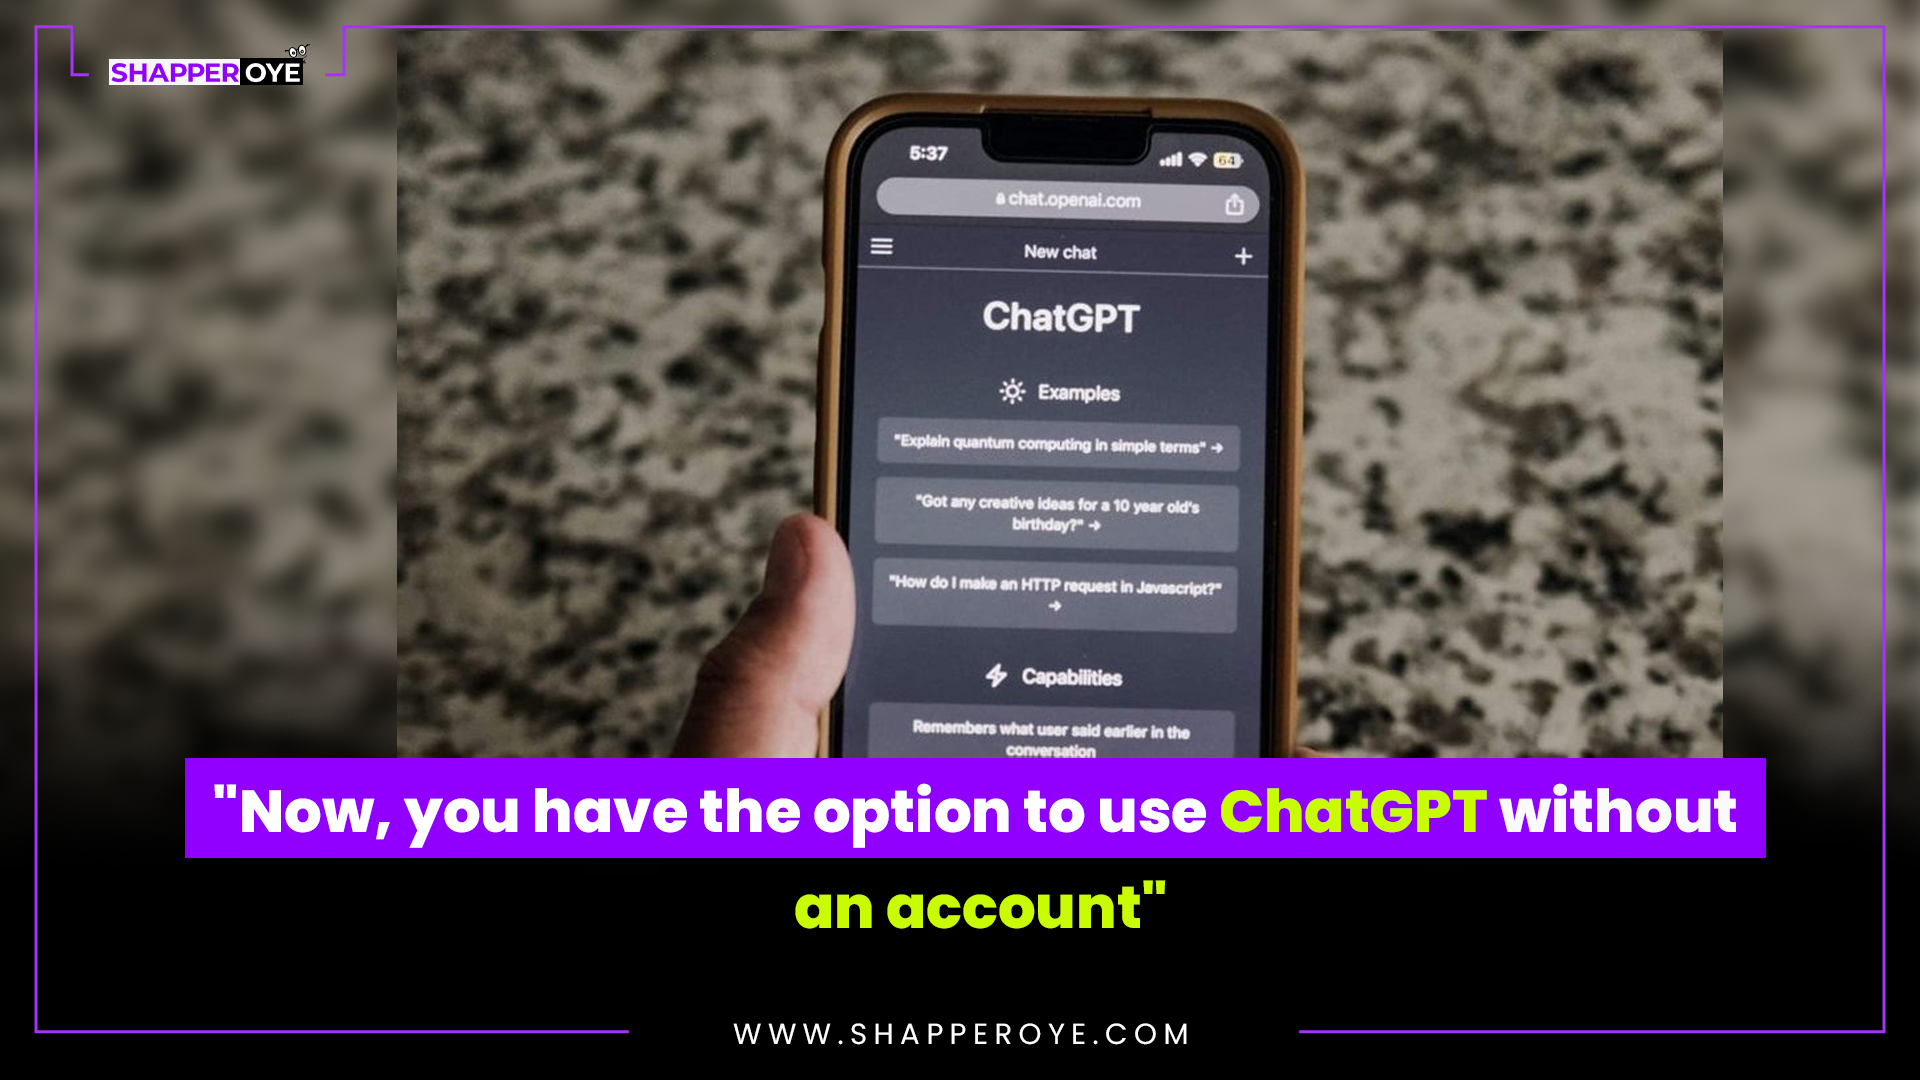 Now, you have the option to use ChatGPT without an account